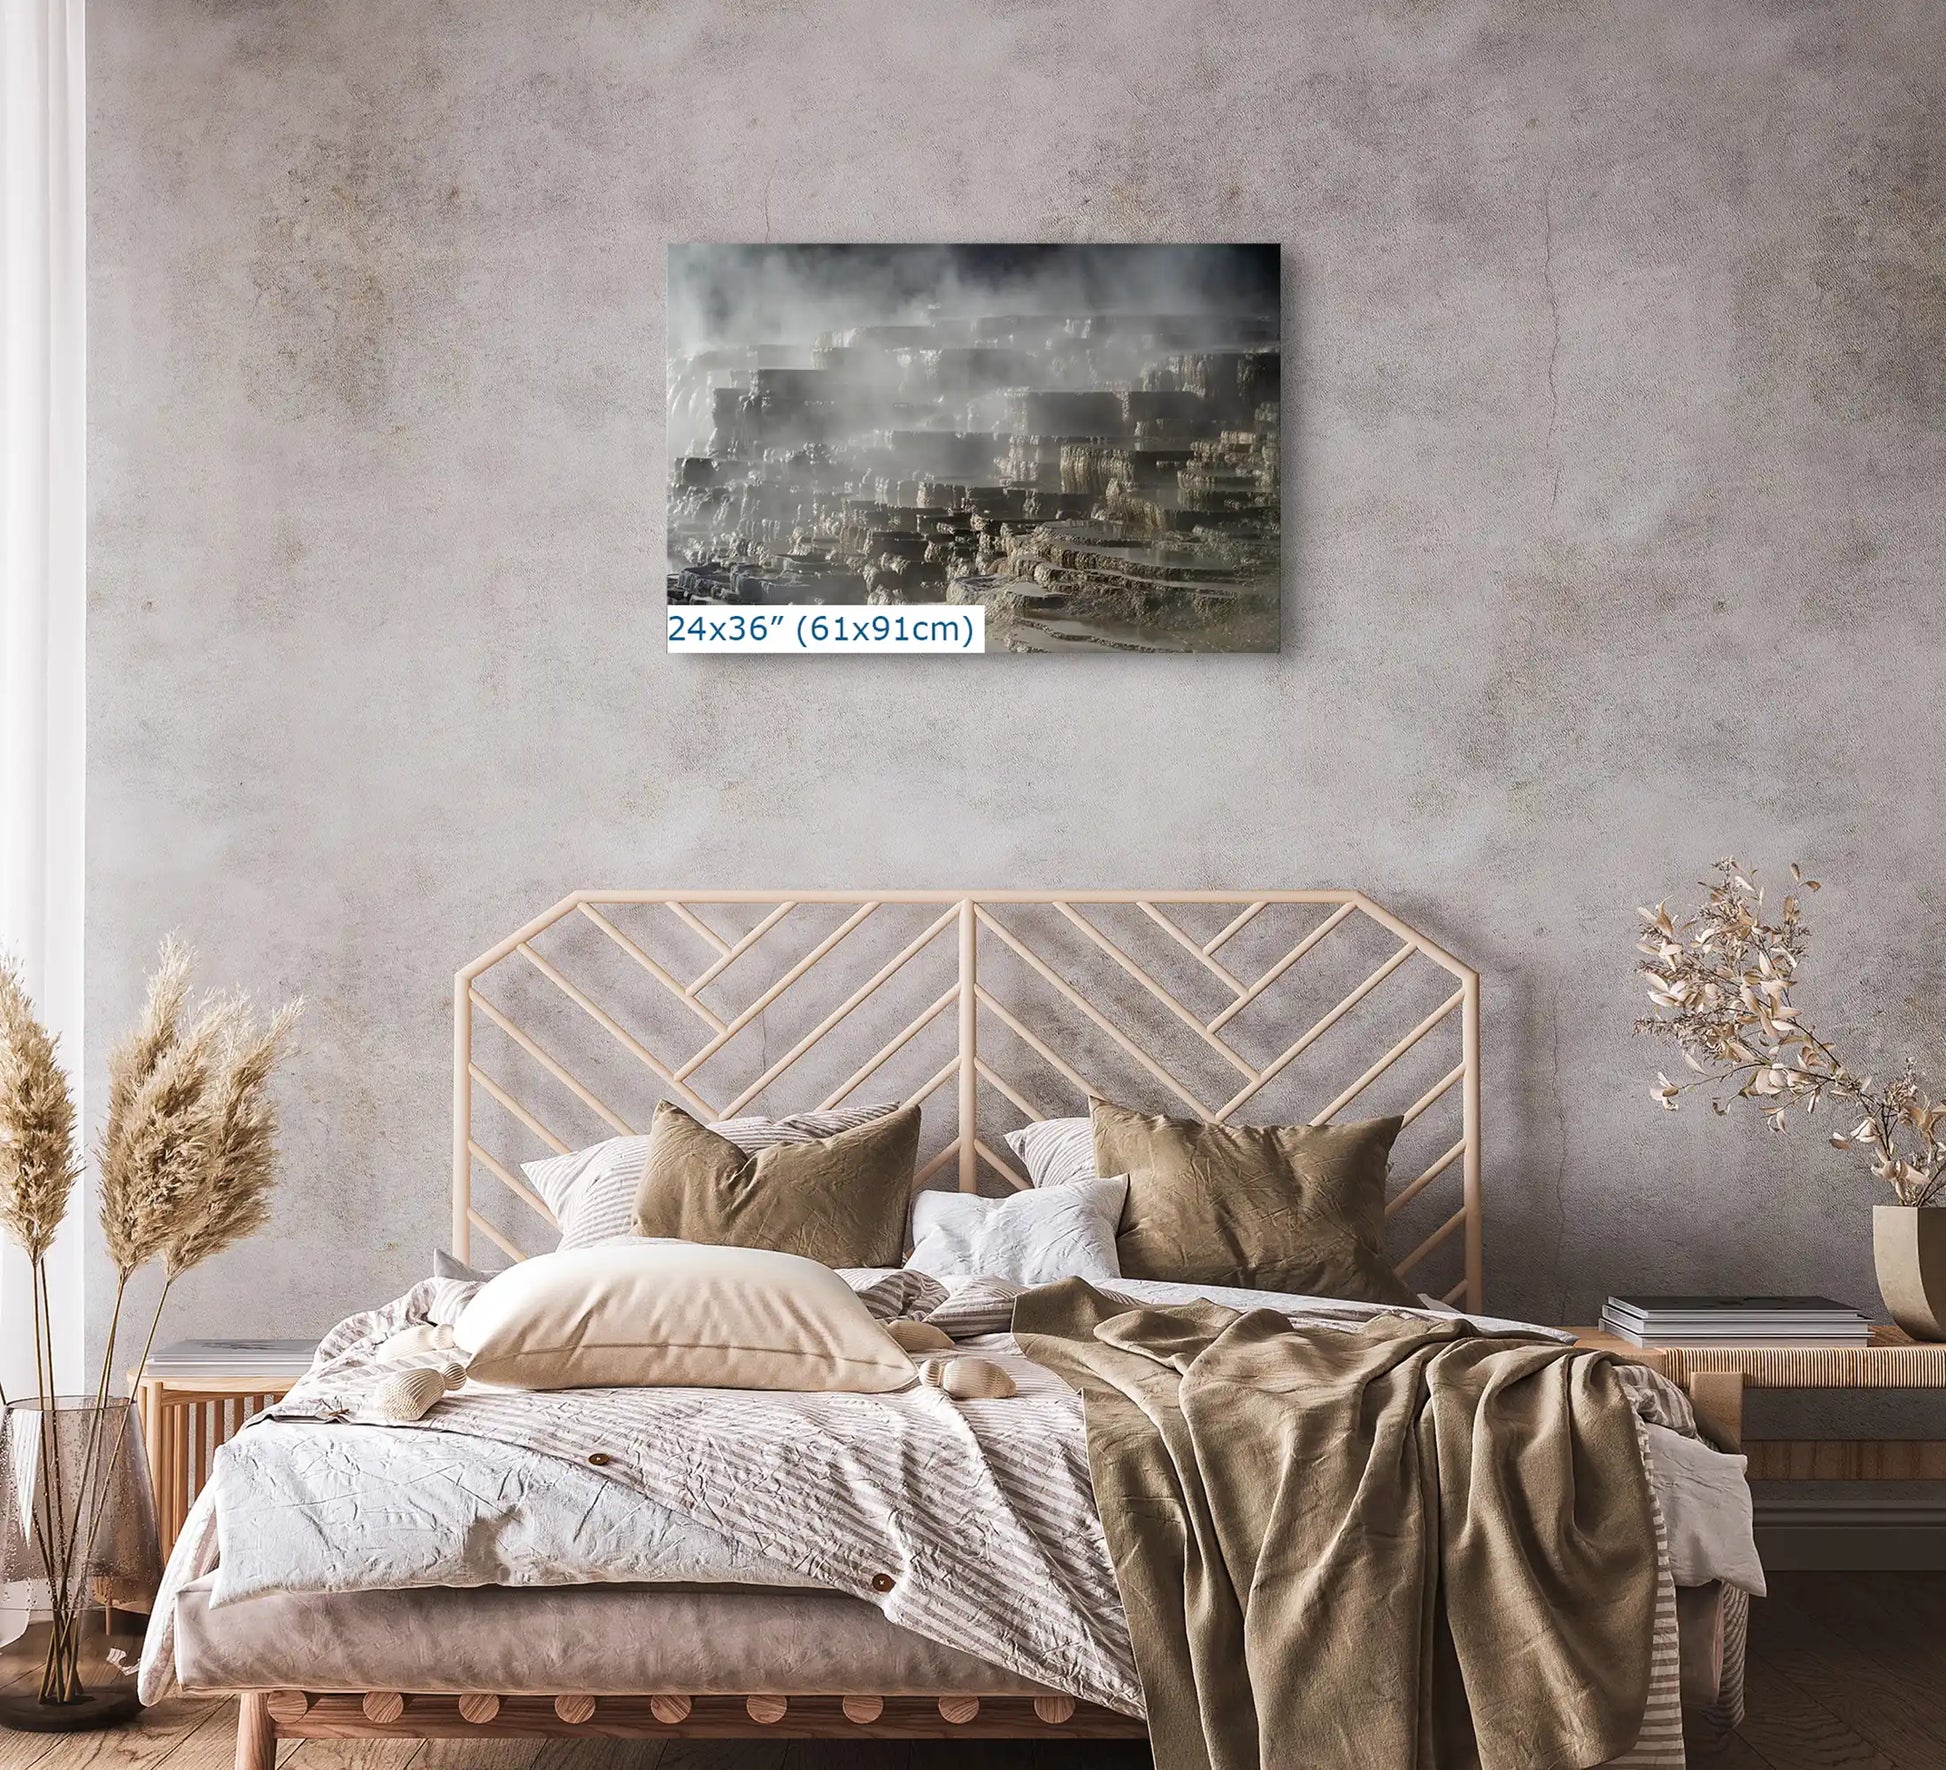 A 24x36 inch canvas print of Mammoth Hot Springs Terraces, centered above a bed with neutral bedding.